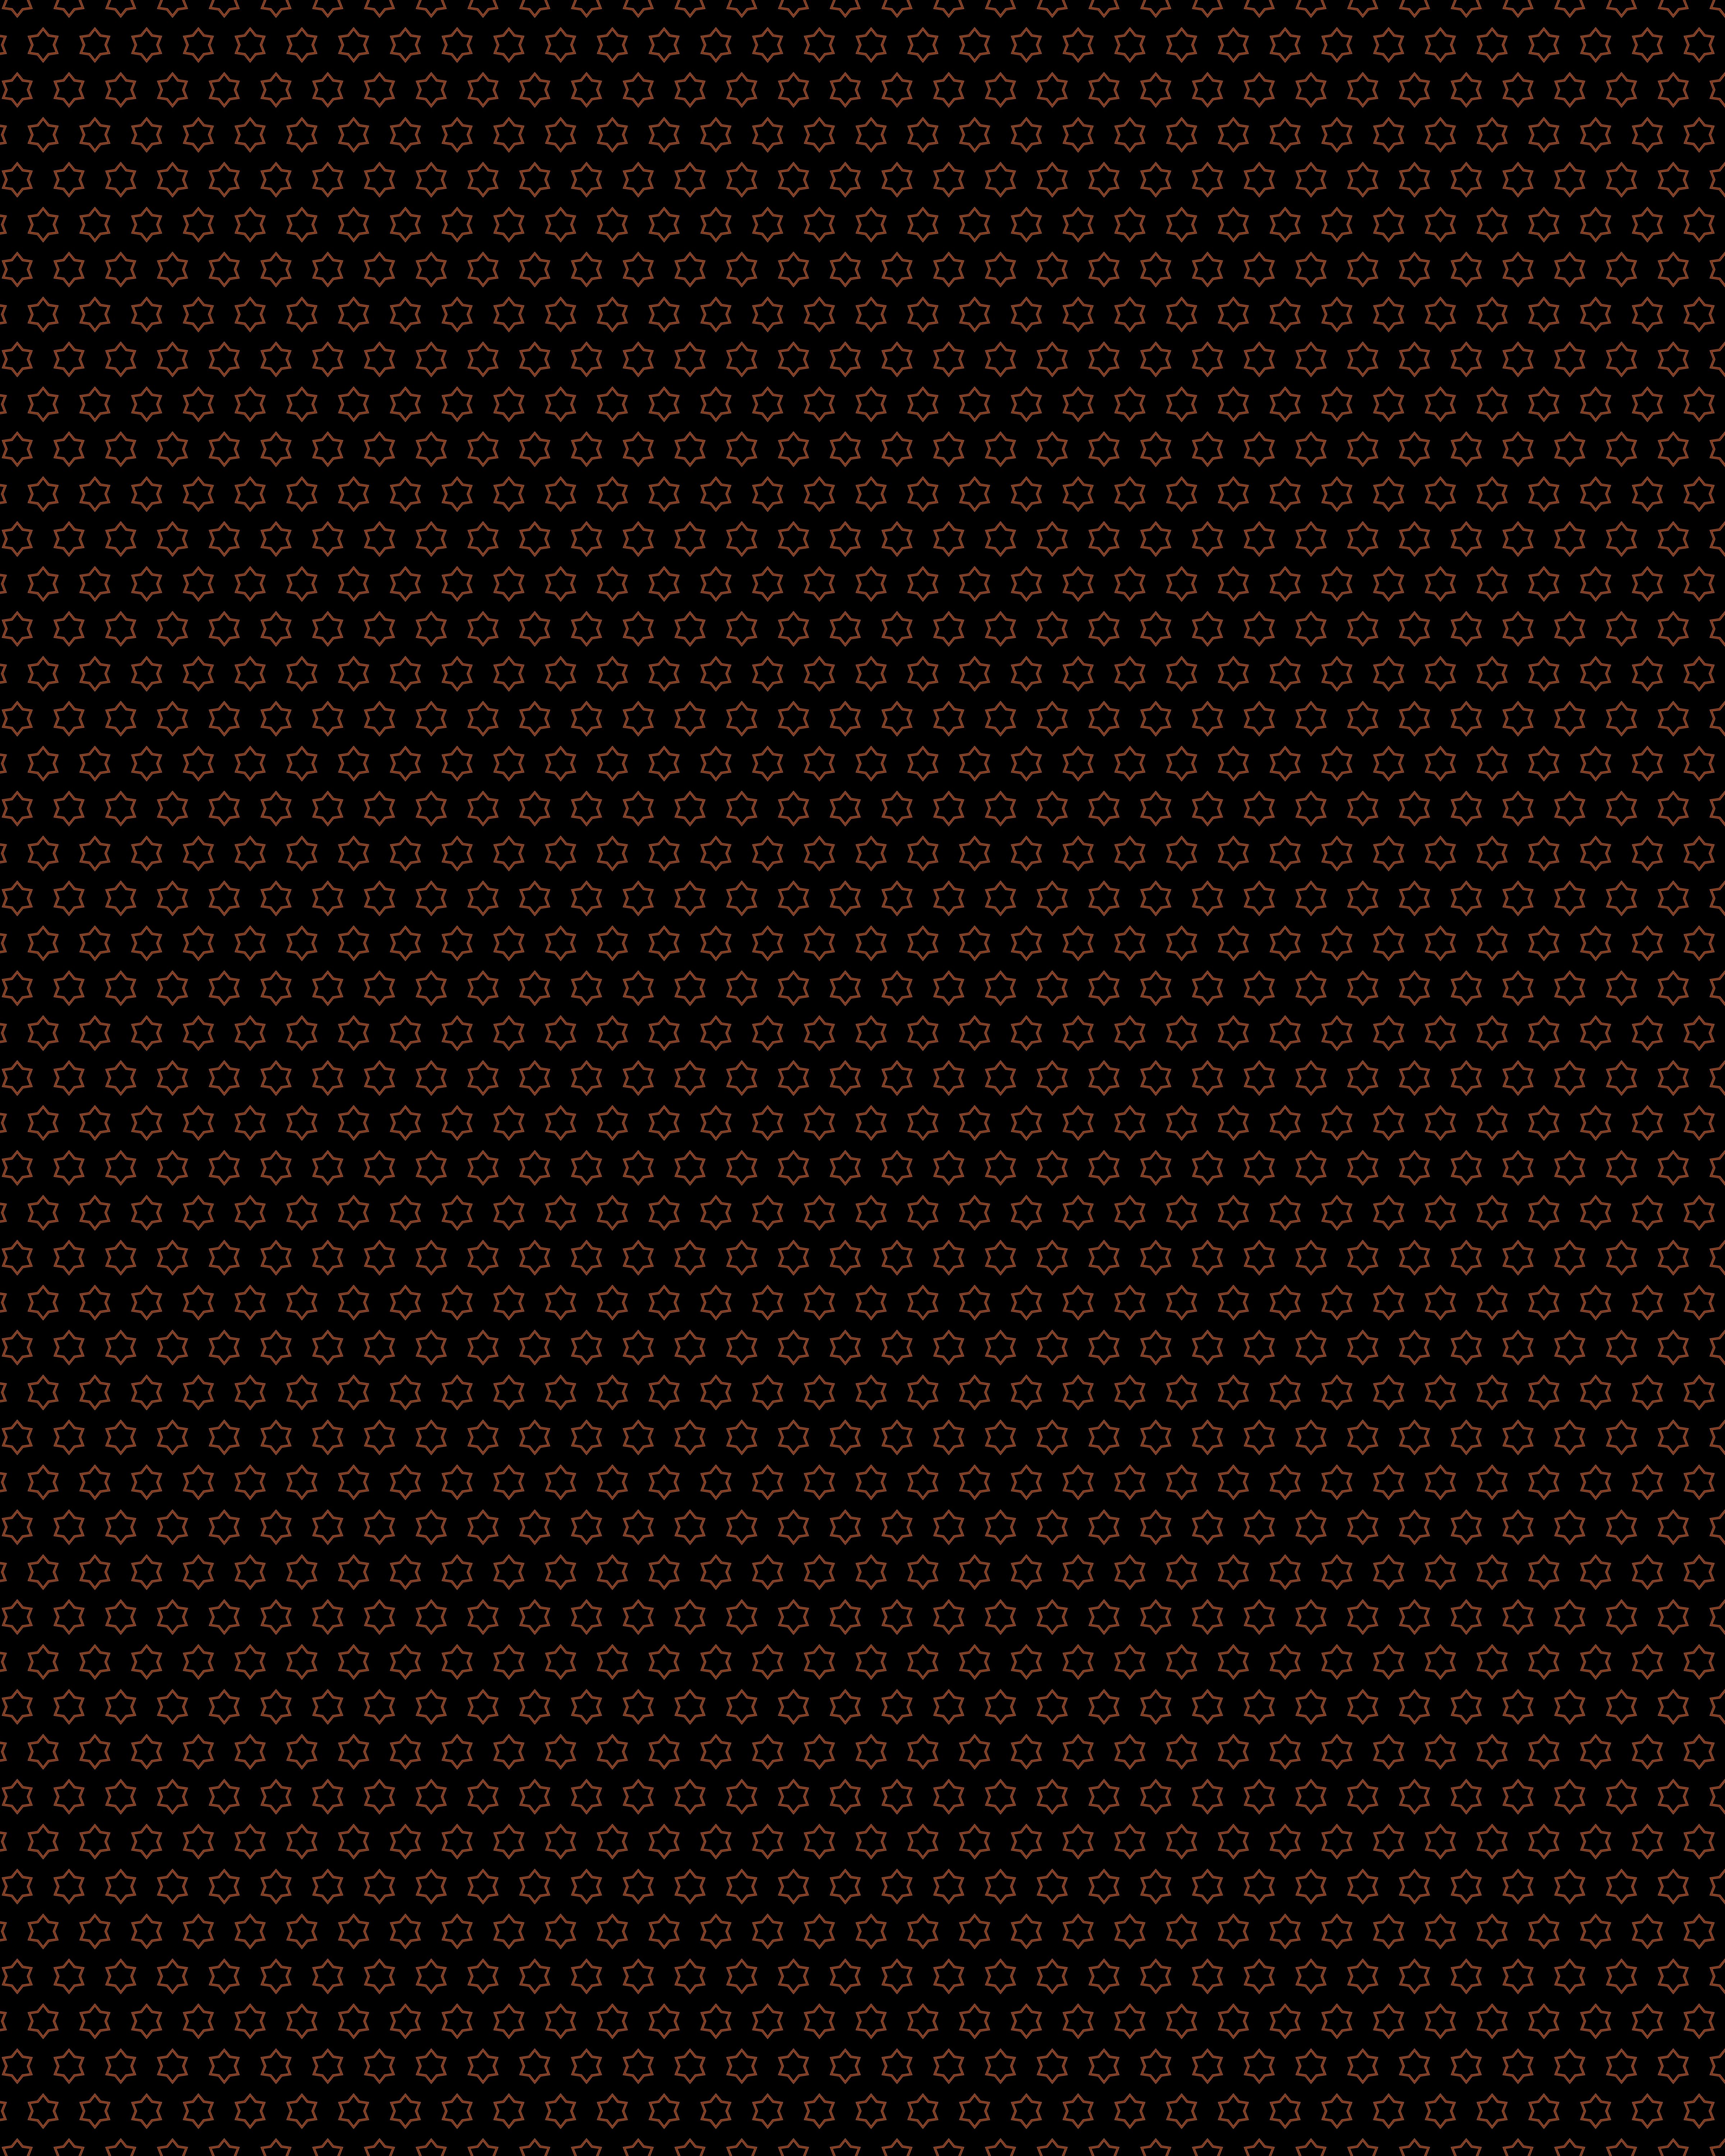 stars, pattern, texture, textures, brown, black background, shallow, geometric, small